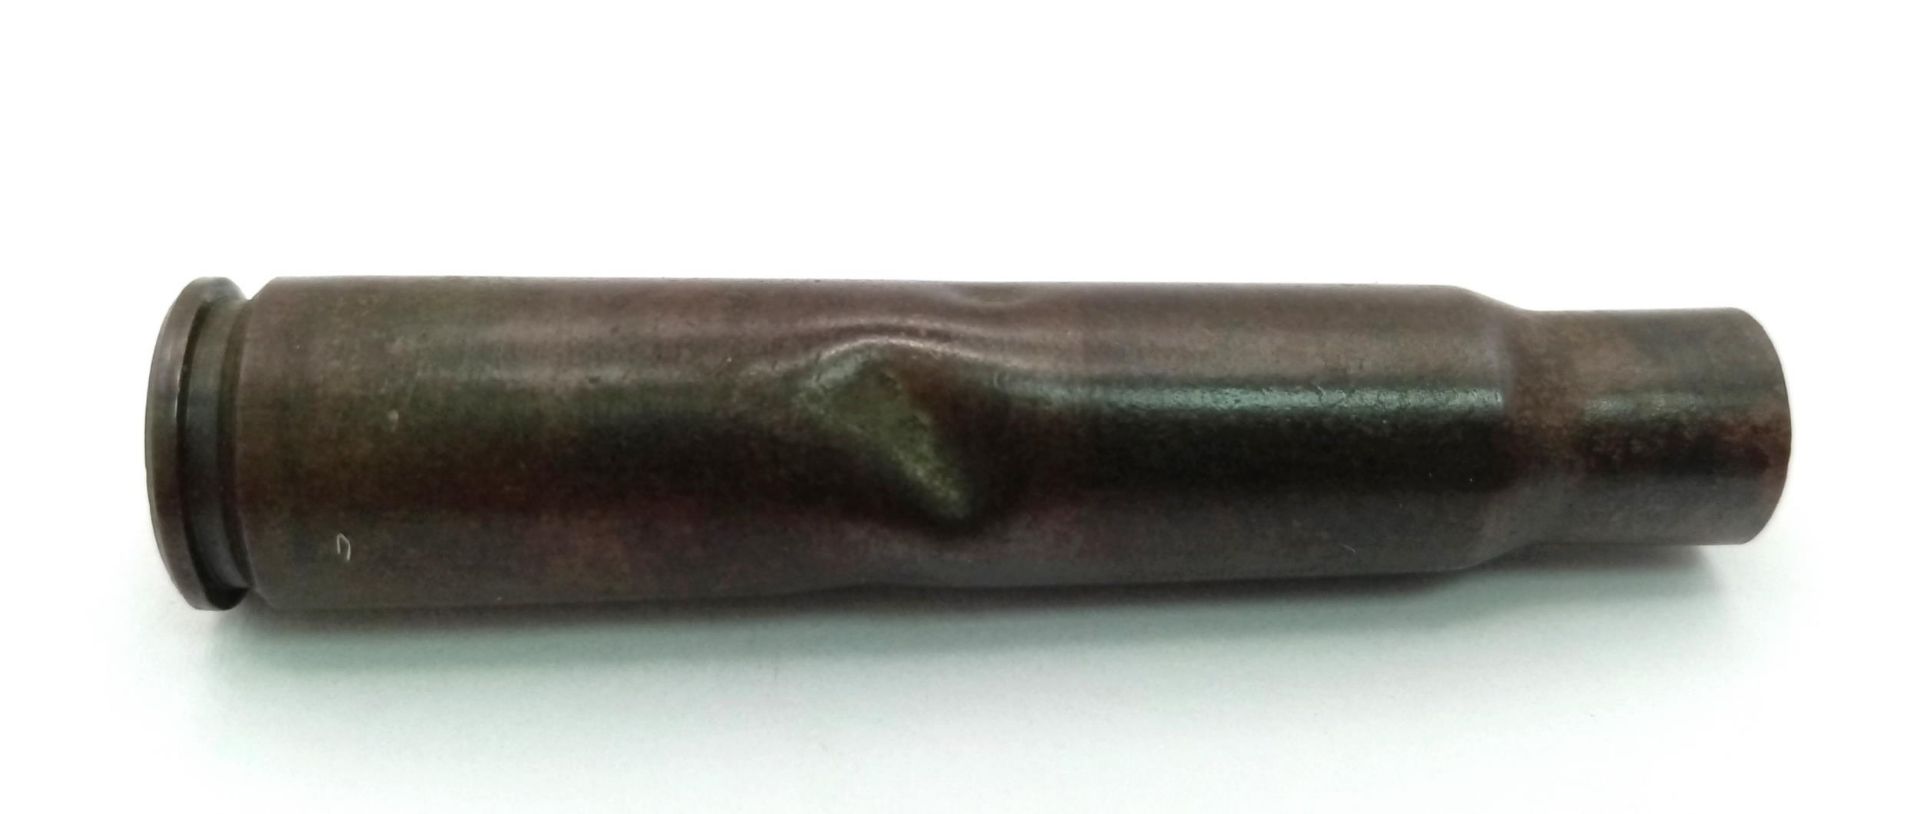 1938 Dated Waffen SS 7.92 INERT empty bullet case. The Shell primer has the classic rectangle